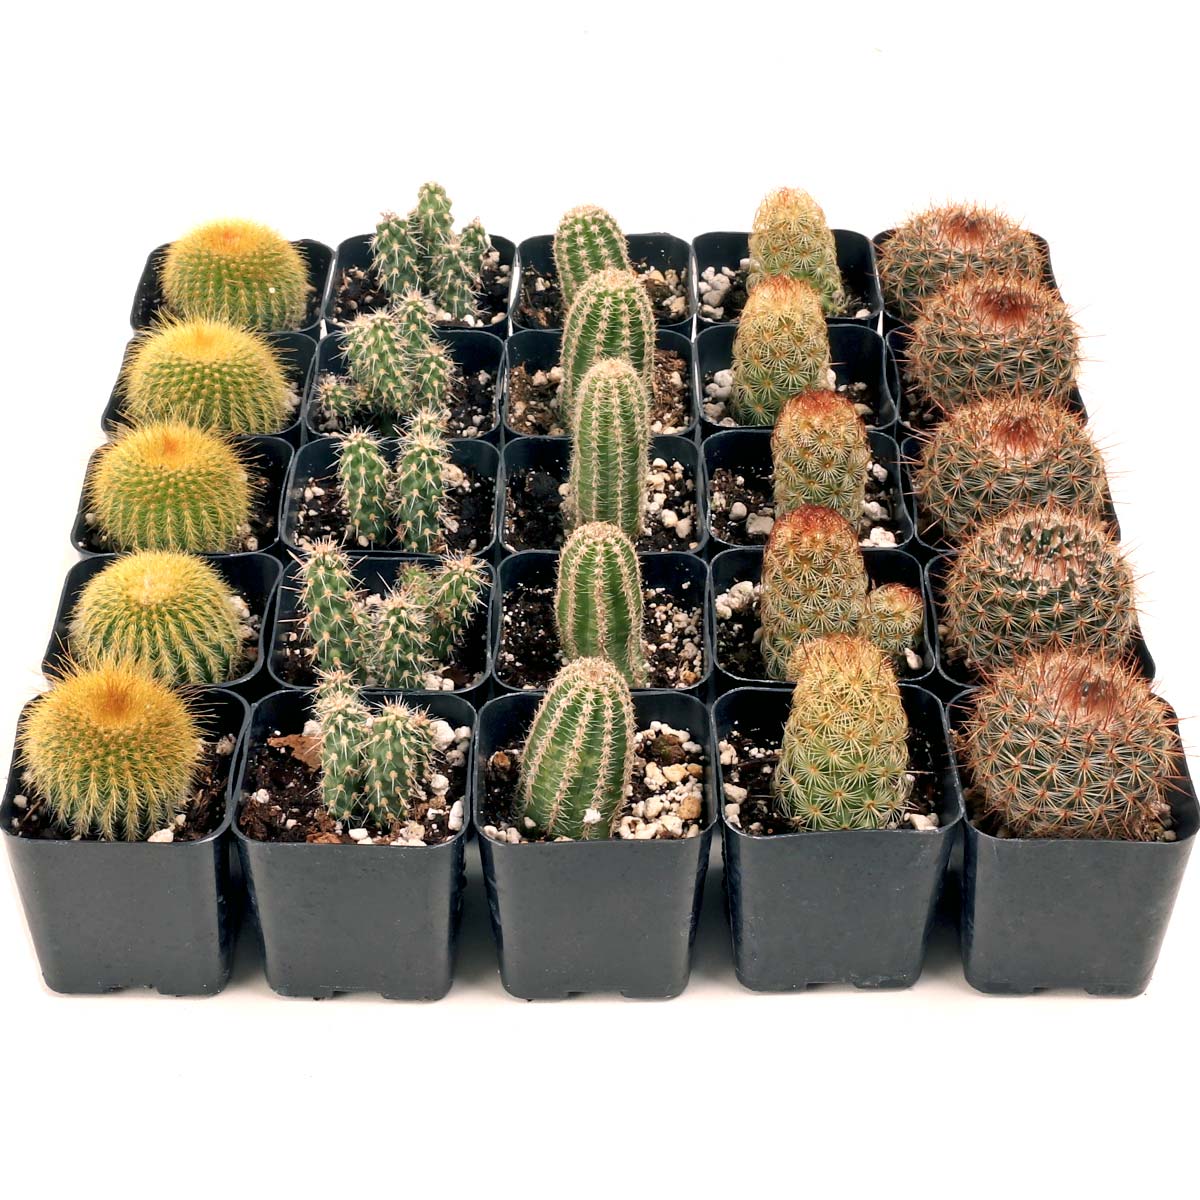 Cactus (Cacti) Bulk 25 Tray - 5 Types w/ ID - 2in Pots Questions & Answers